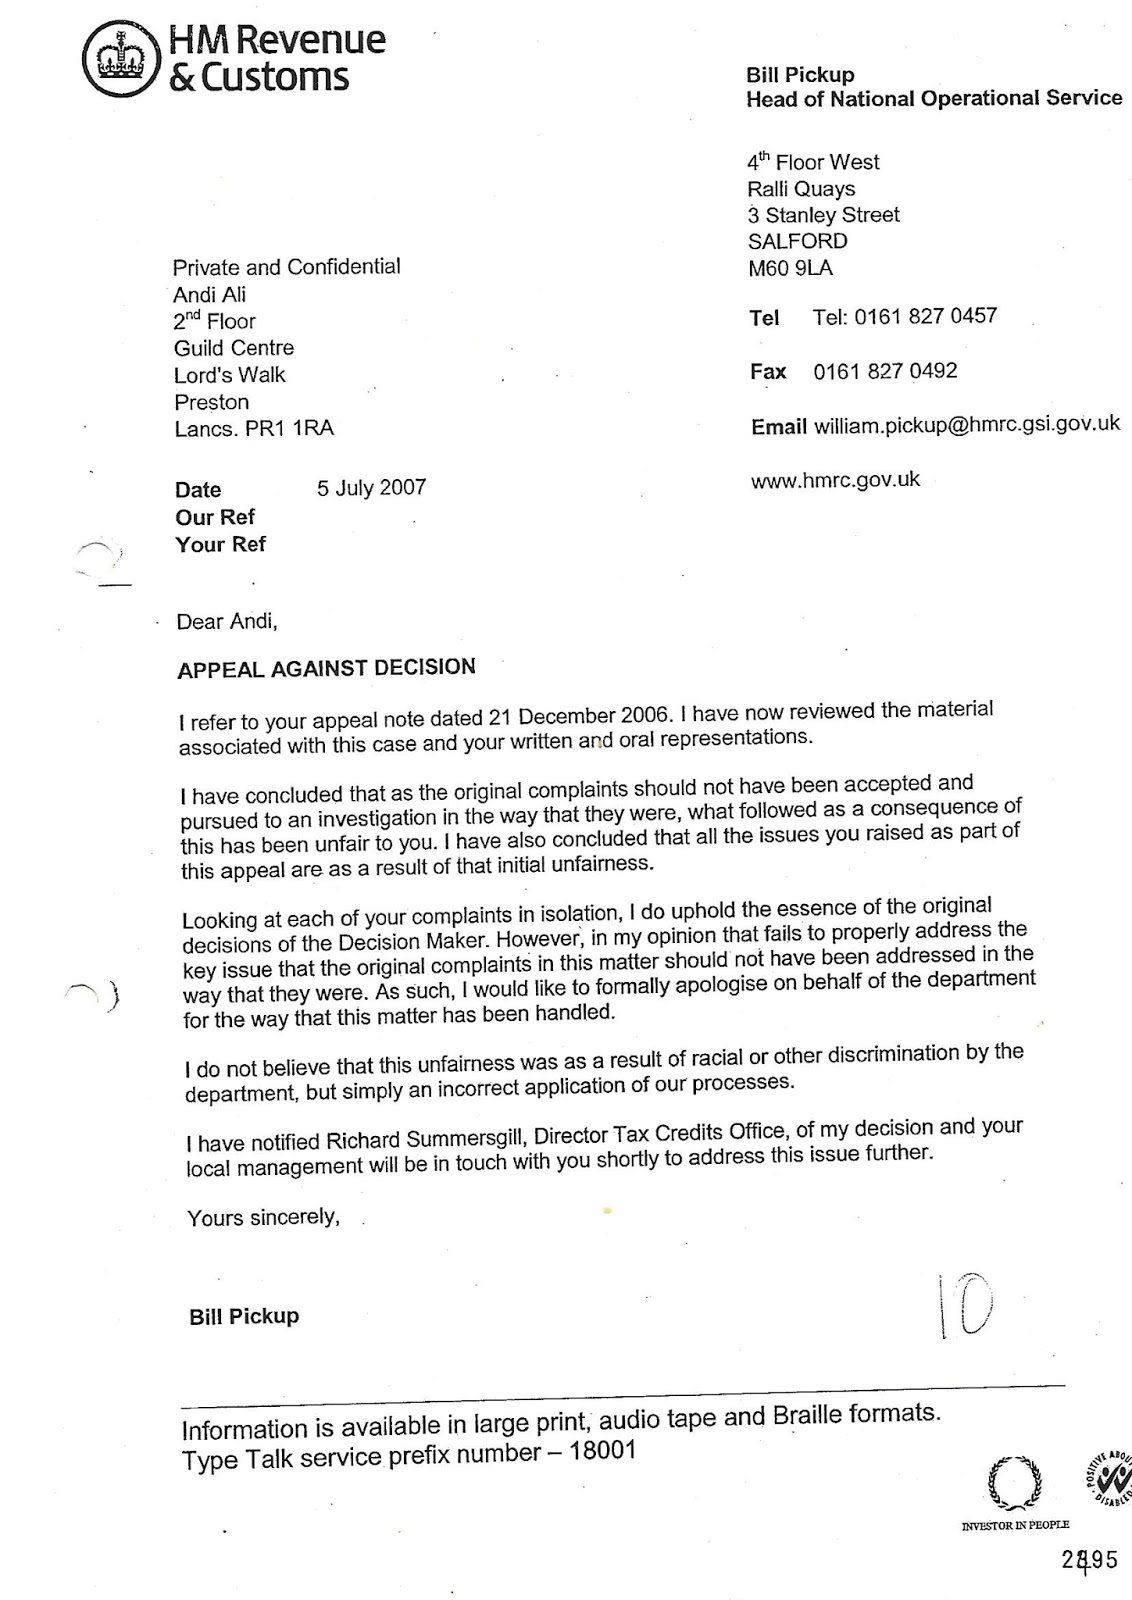 Hmrcleaks Blog Of A Civil Service Whistleblower In Her Majesty S Revenue And Customs Hmrc Bill Pickup Hmrc Head Of National Operational Service Letter To Hmrc Manager Anthony Stansfield Dated 5 July